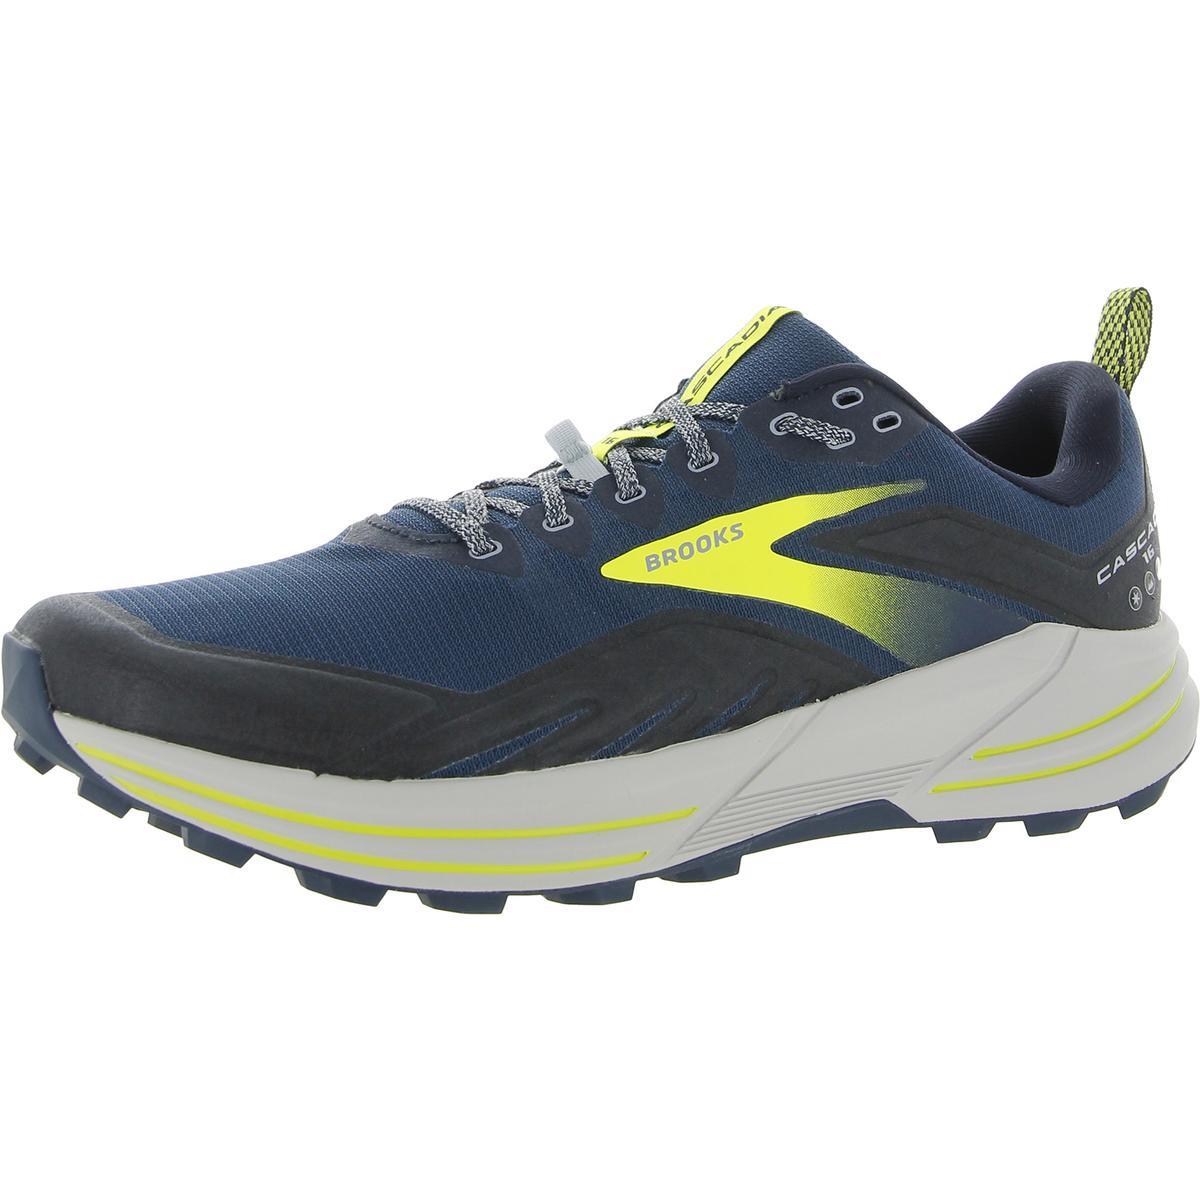 Brooks Mens Cascadia 16 Gym Athletic and Training Shoes Sneakers Bhfo 8779 Blue/Titan